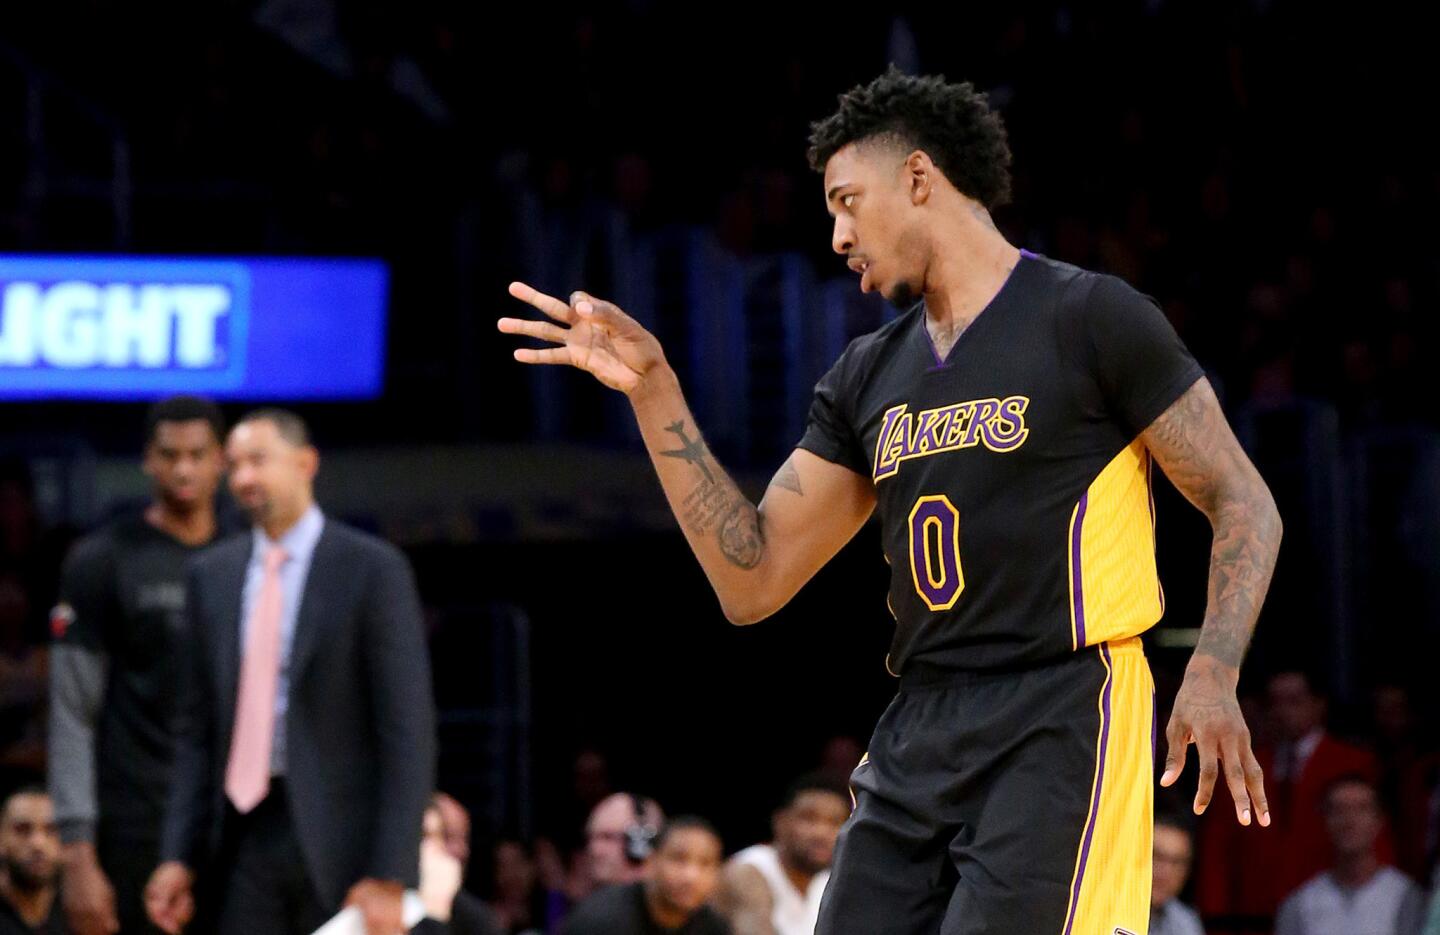 Lakers guard Nick Young celebrates after scoring a three-pointer against the Heat during the second quarter.